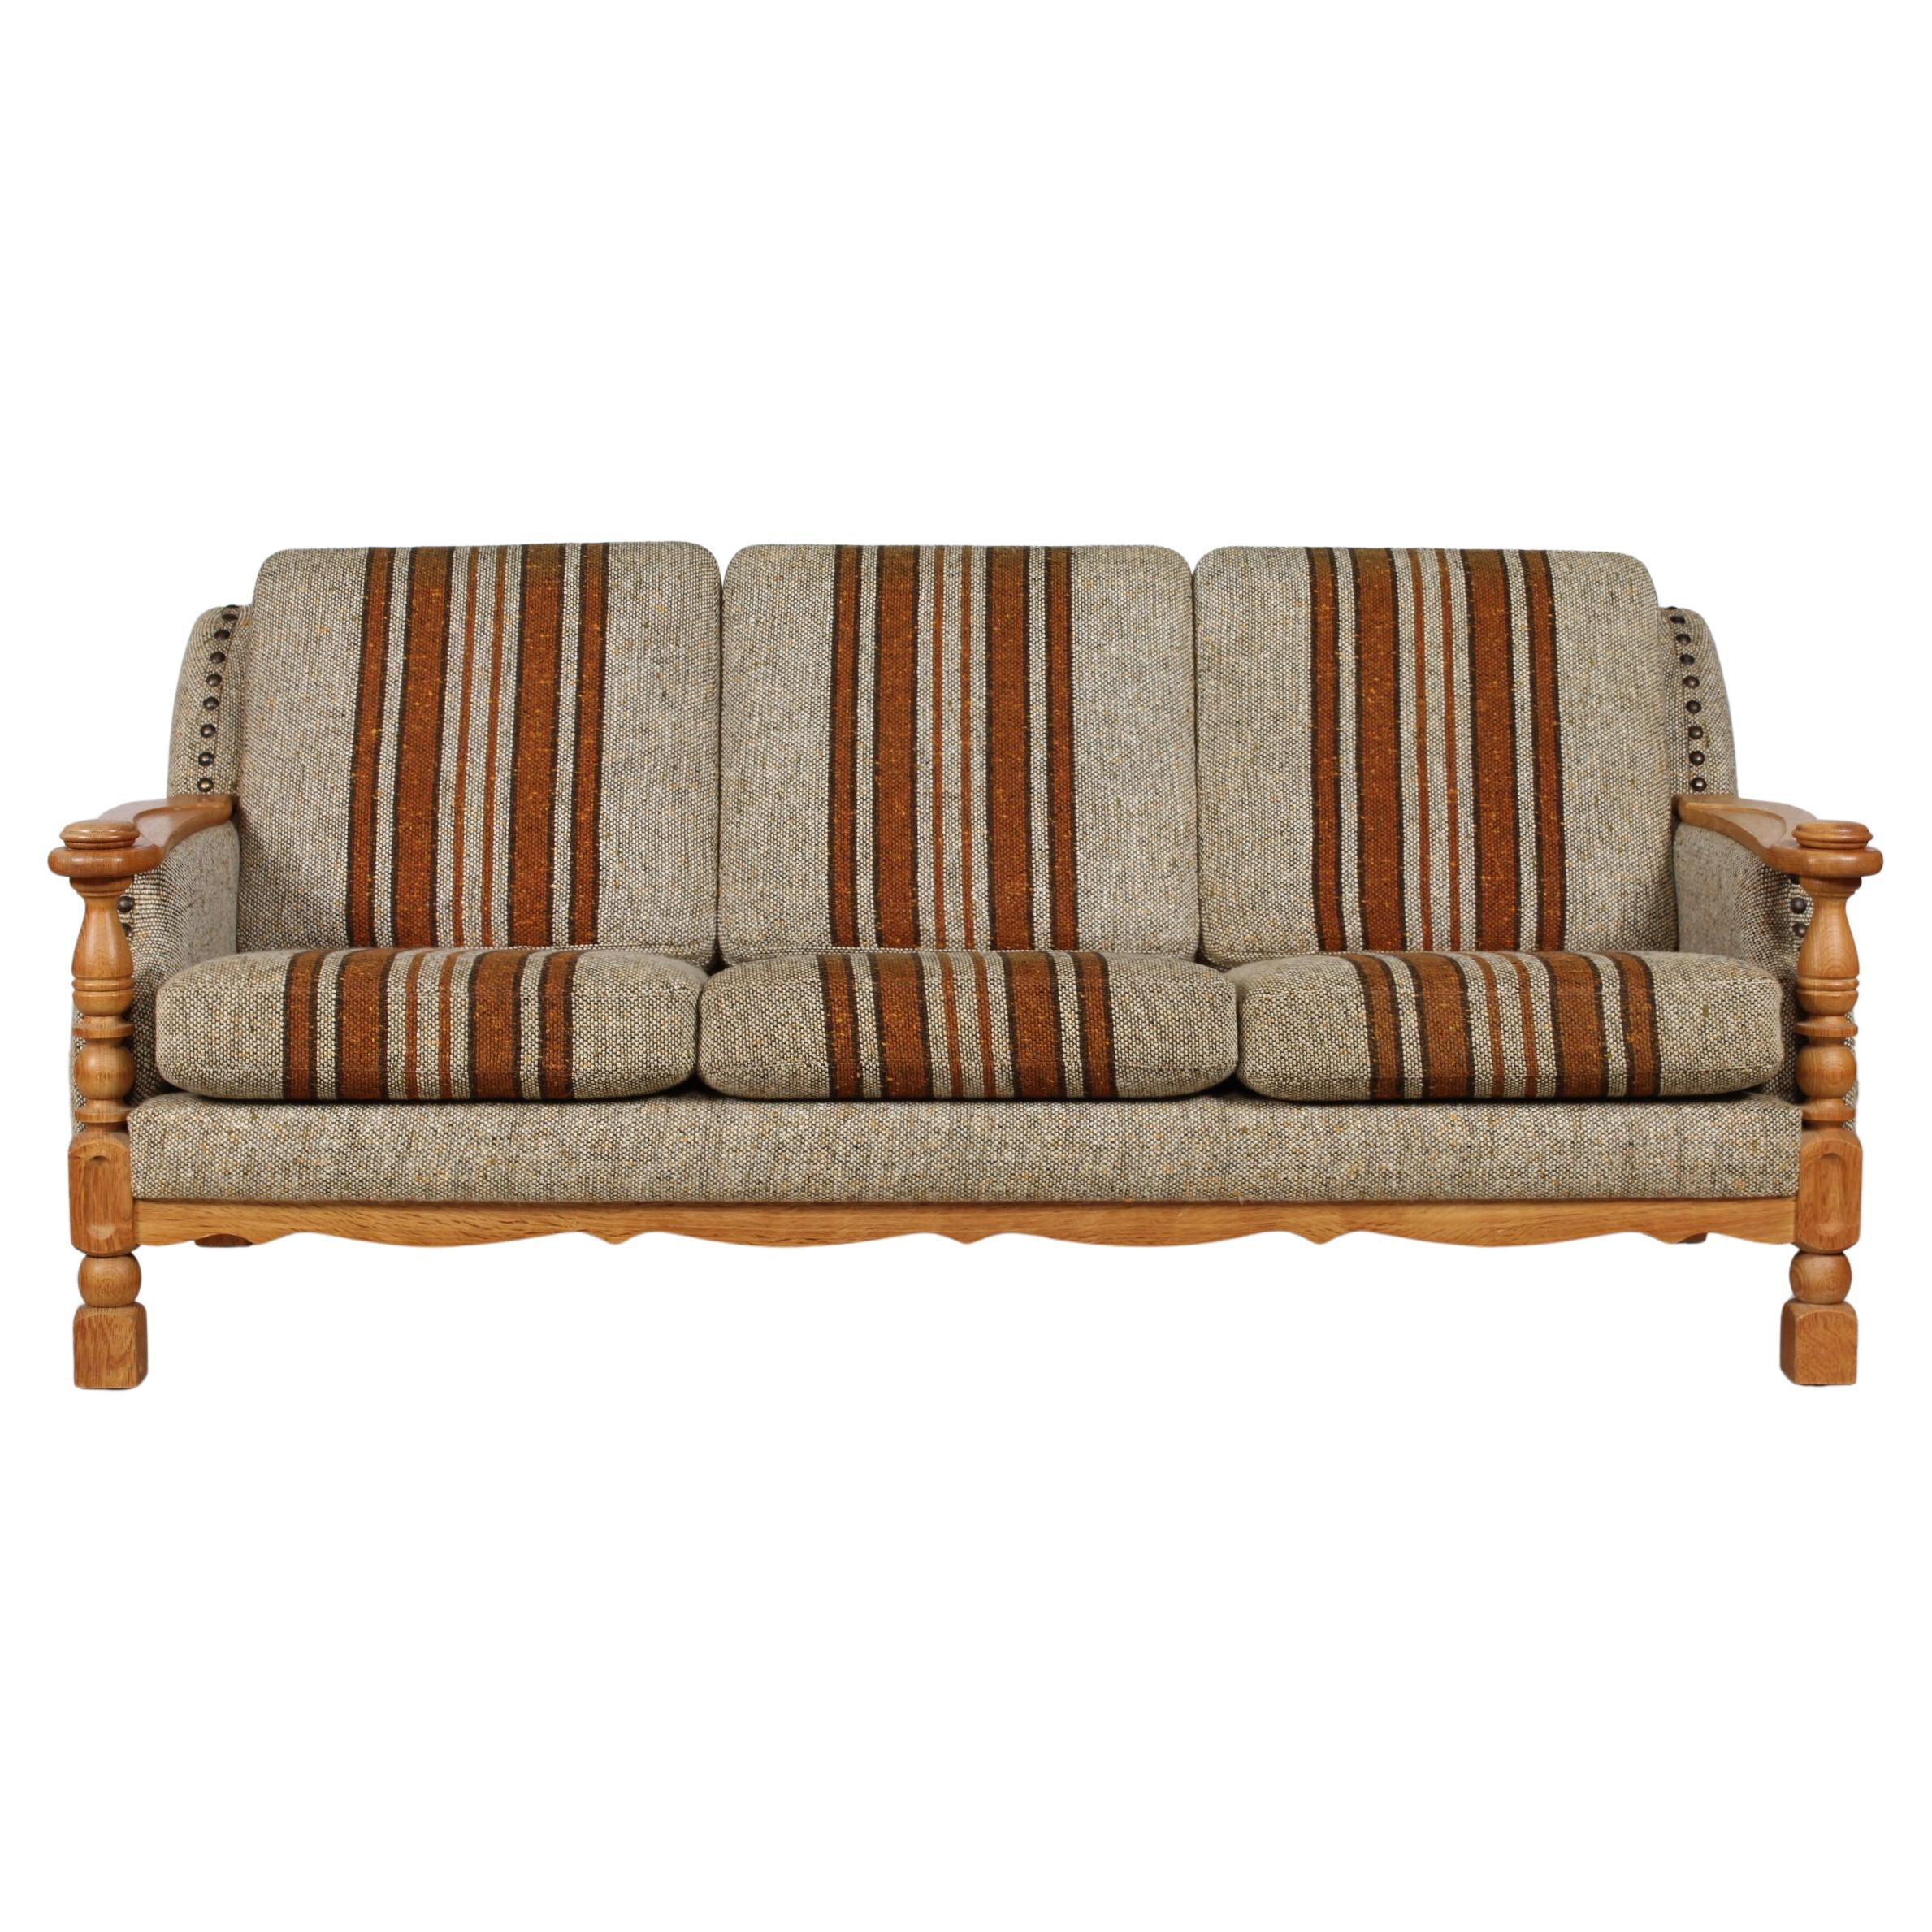 Danish vintage sofa most likely designed by Henning Kjærnulf and manufactured in Denmark by EG Møbler.
The frame and armrests are made of turned and carved solid oak upholstered with the original striped wool with brass nails. 

A great sofa in the